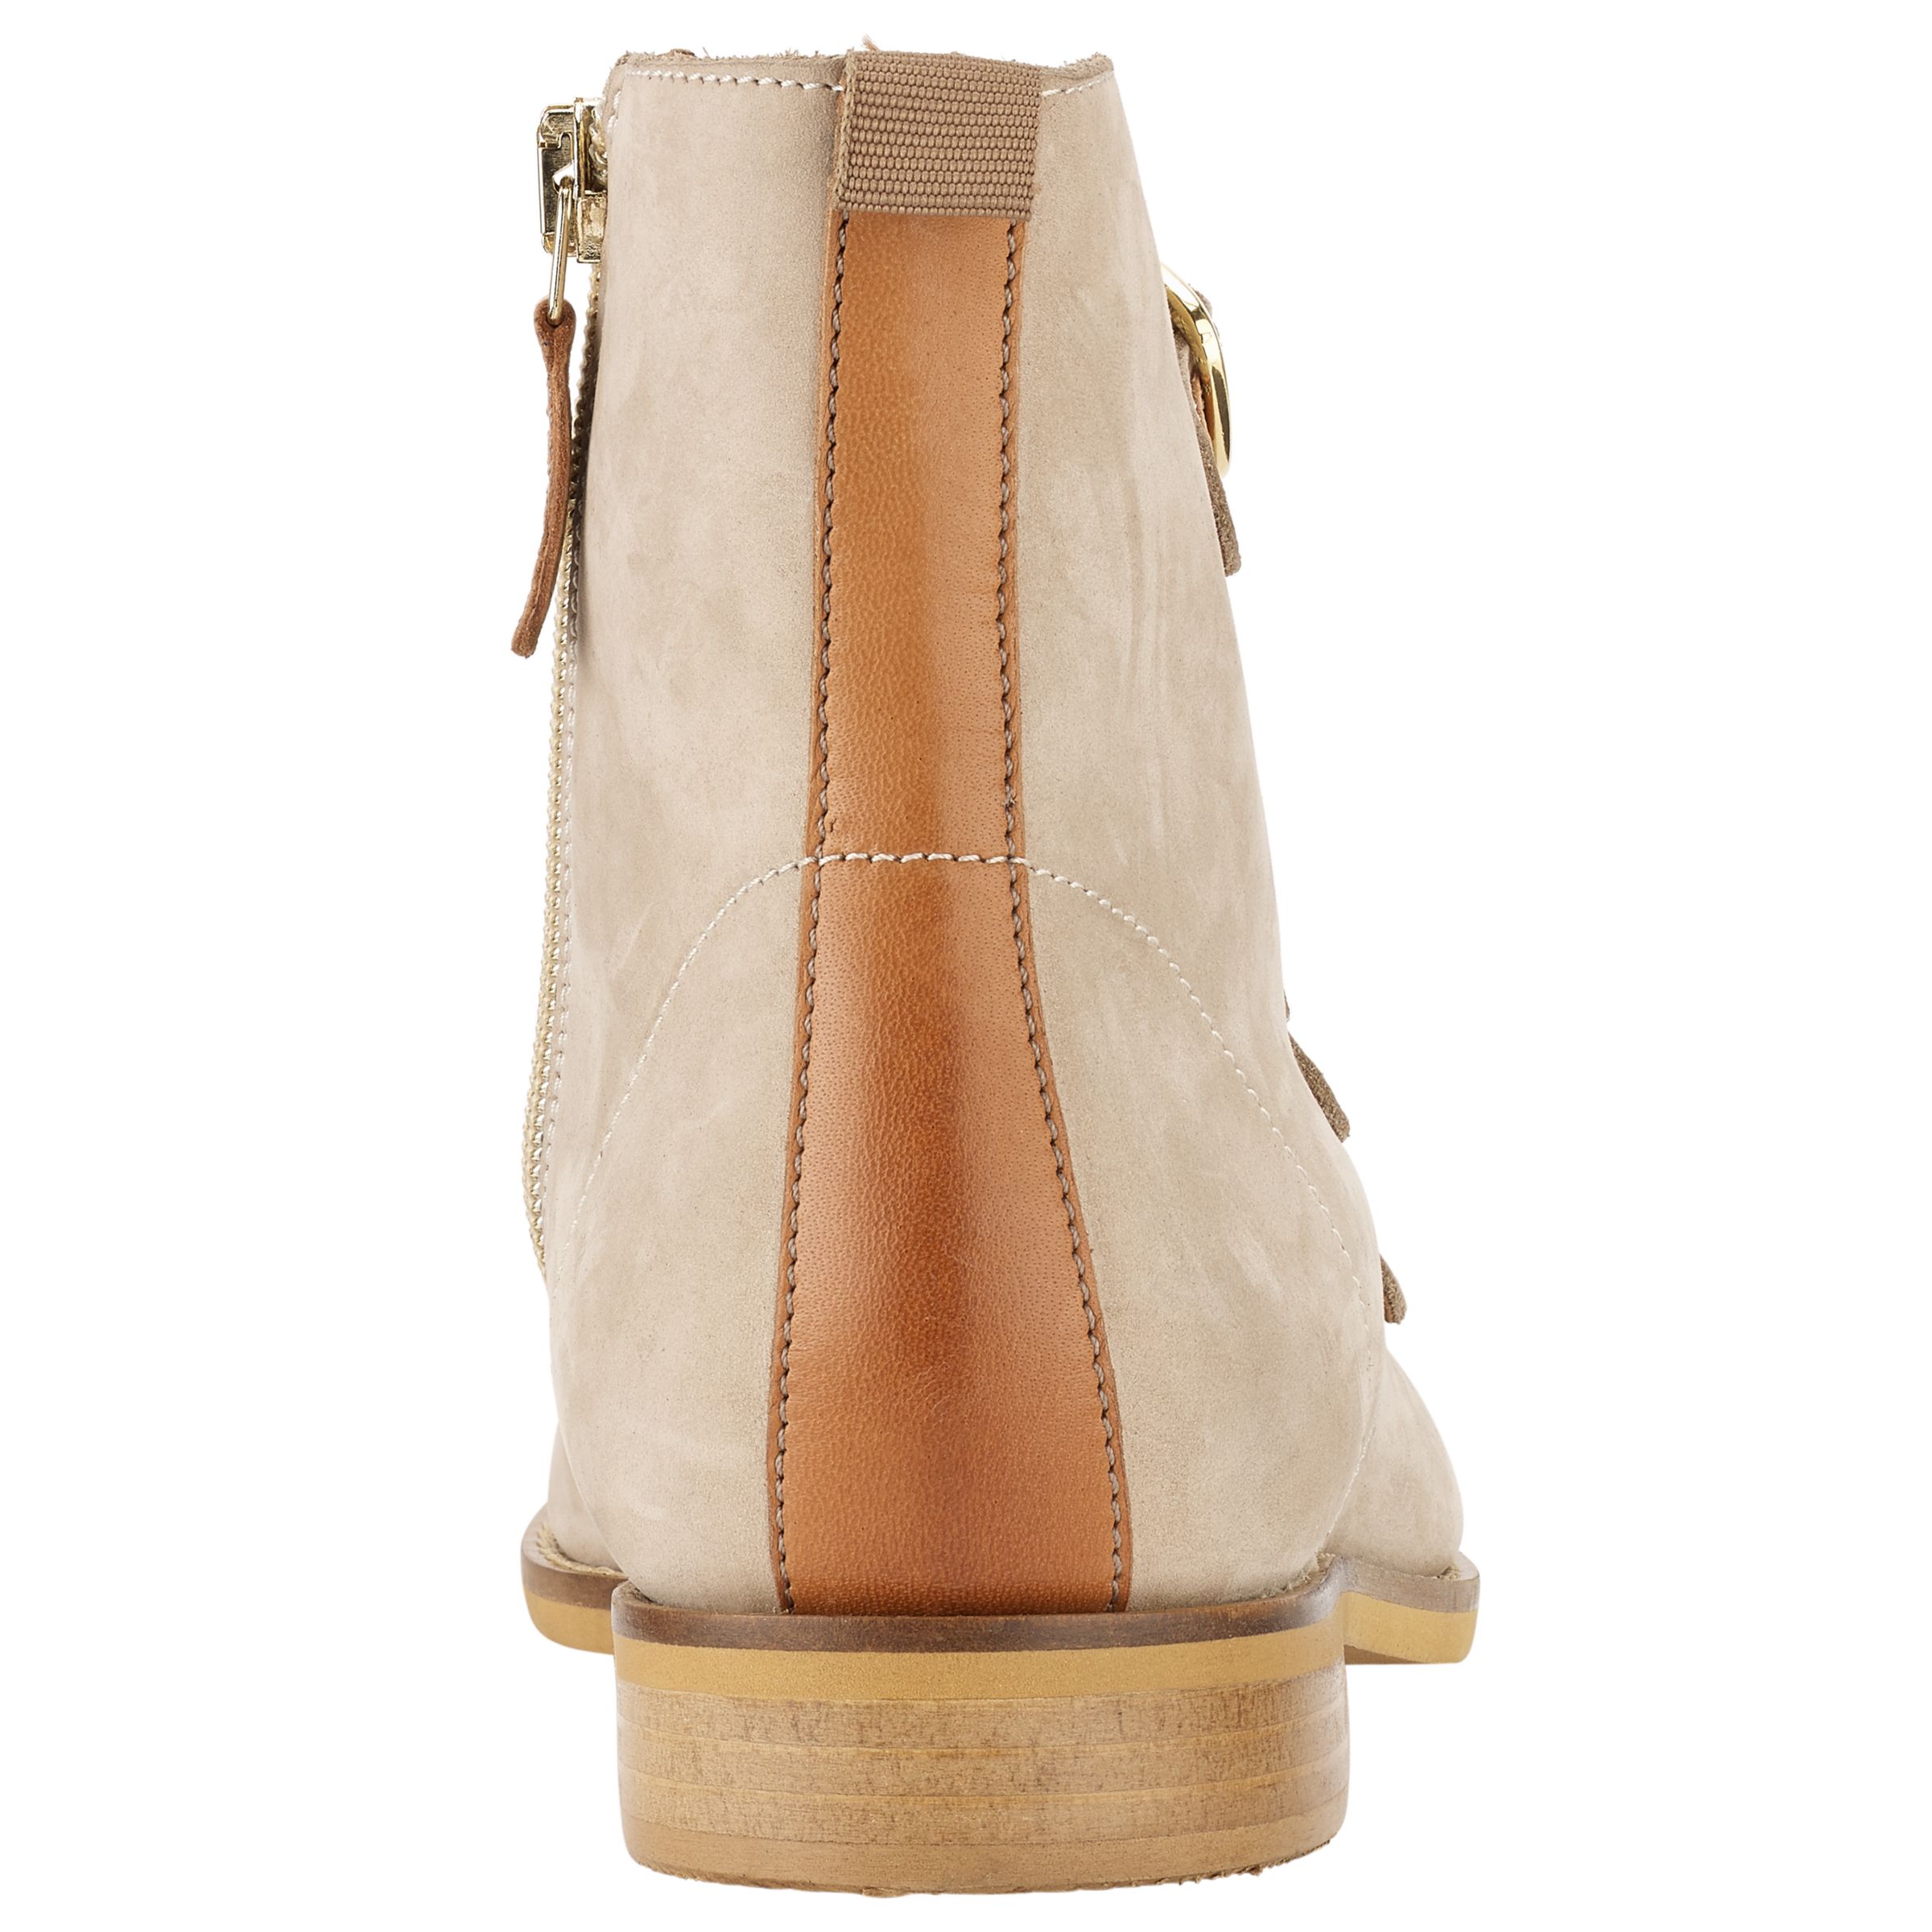 Somerset by Alice Temperley Prestleigh Buckle Ankle Boots, Natural at ...